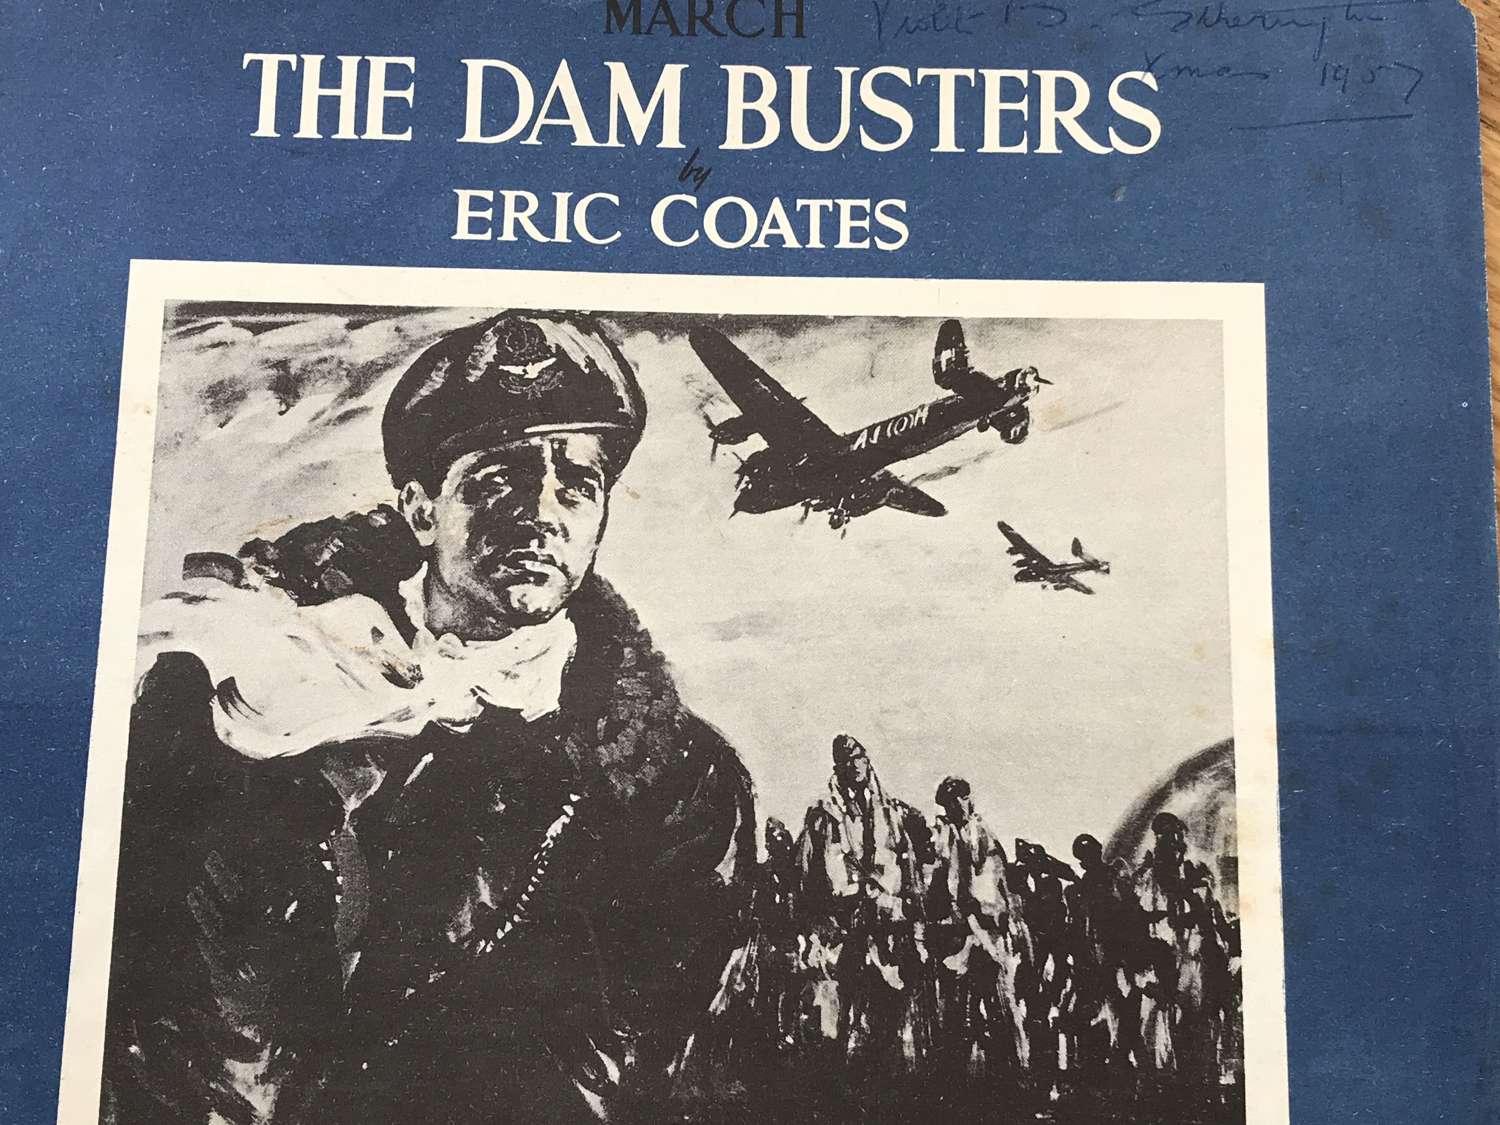 The Dam Busters March music sheet from 1957